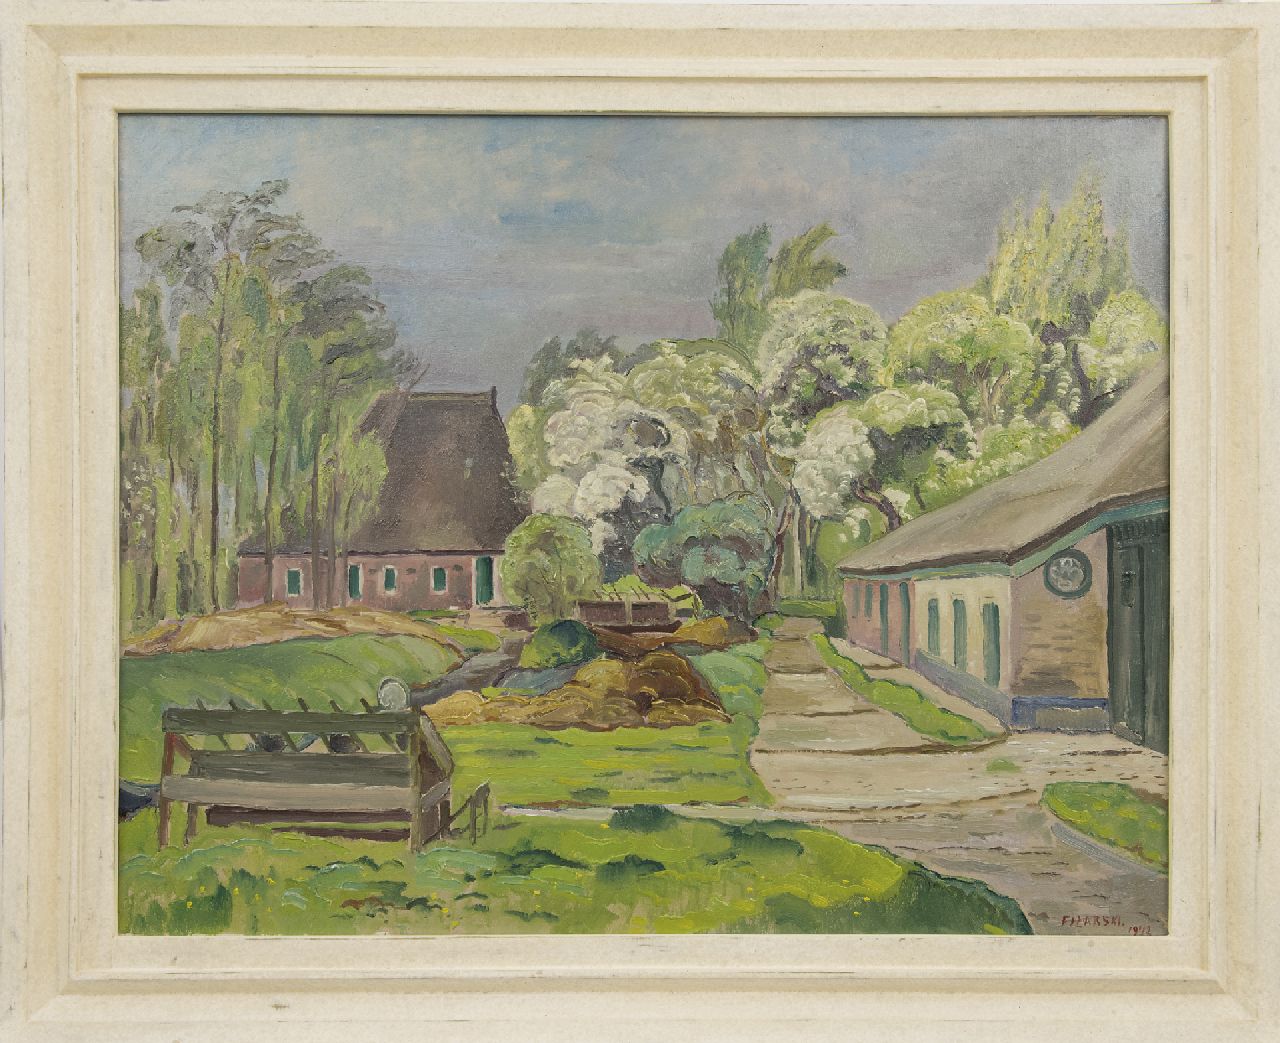 Filarski D.H.W.  | 'Dirk' Herman Willem Filarski | Paintings offered for sale | Farms, oil on canvas 80.0 x 100.5 cm, signed l.r. and dated 1942